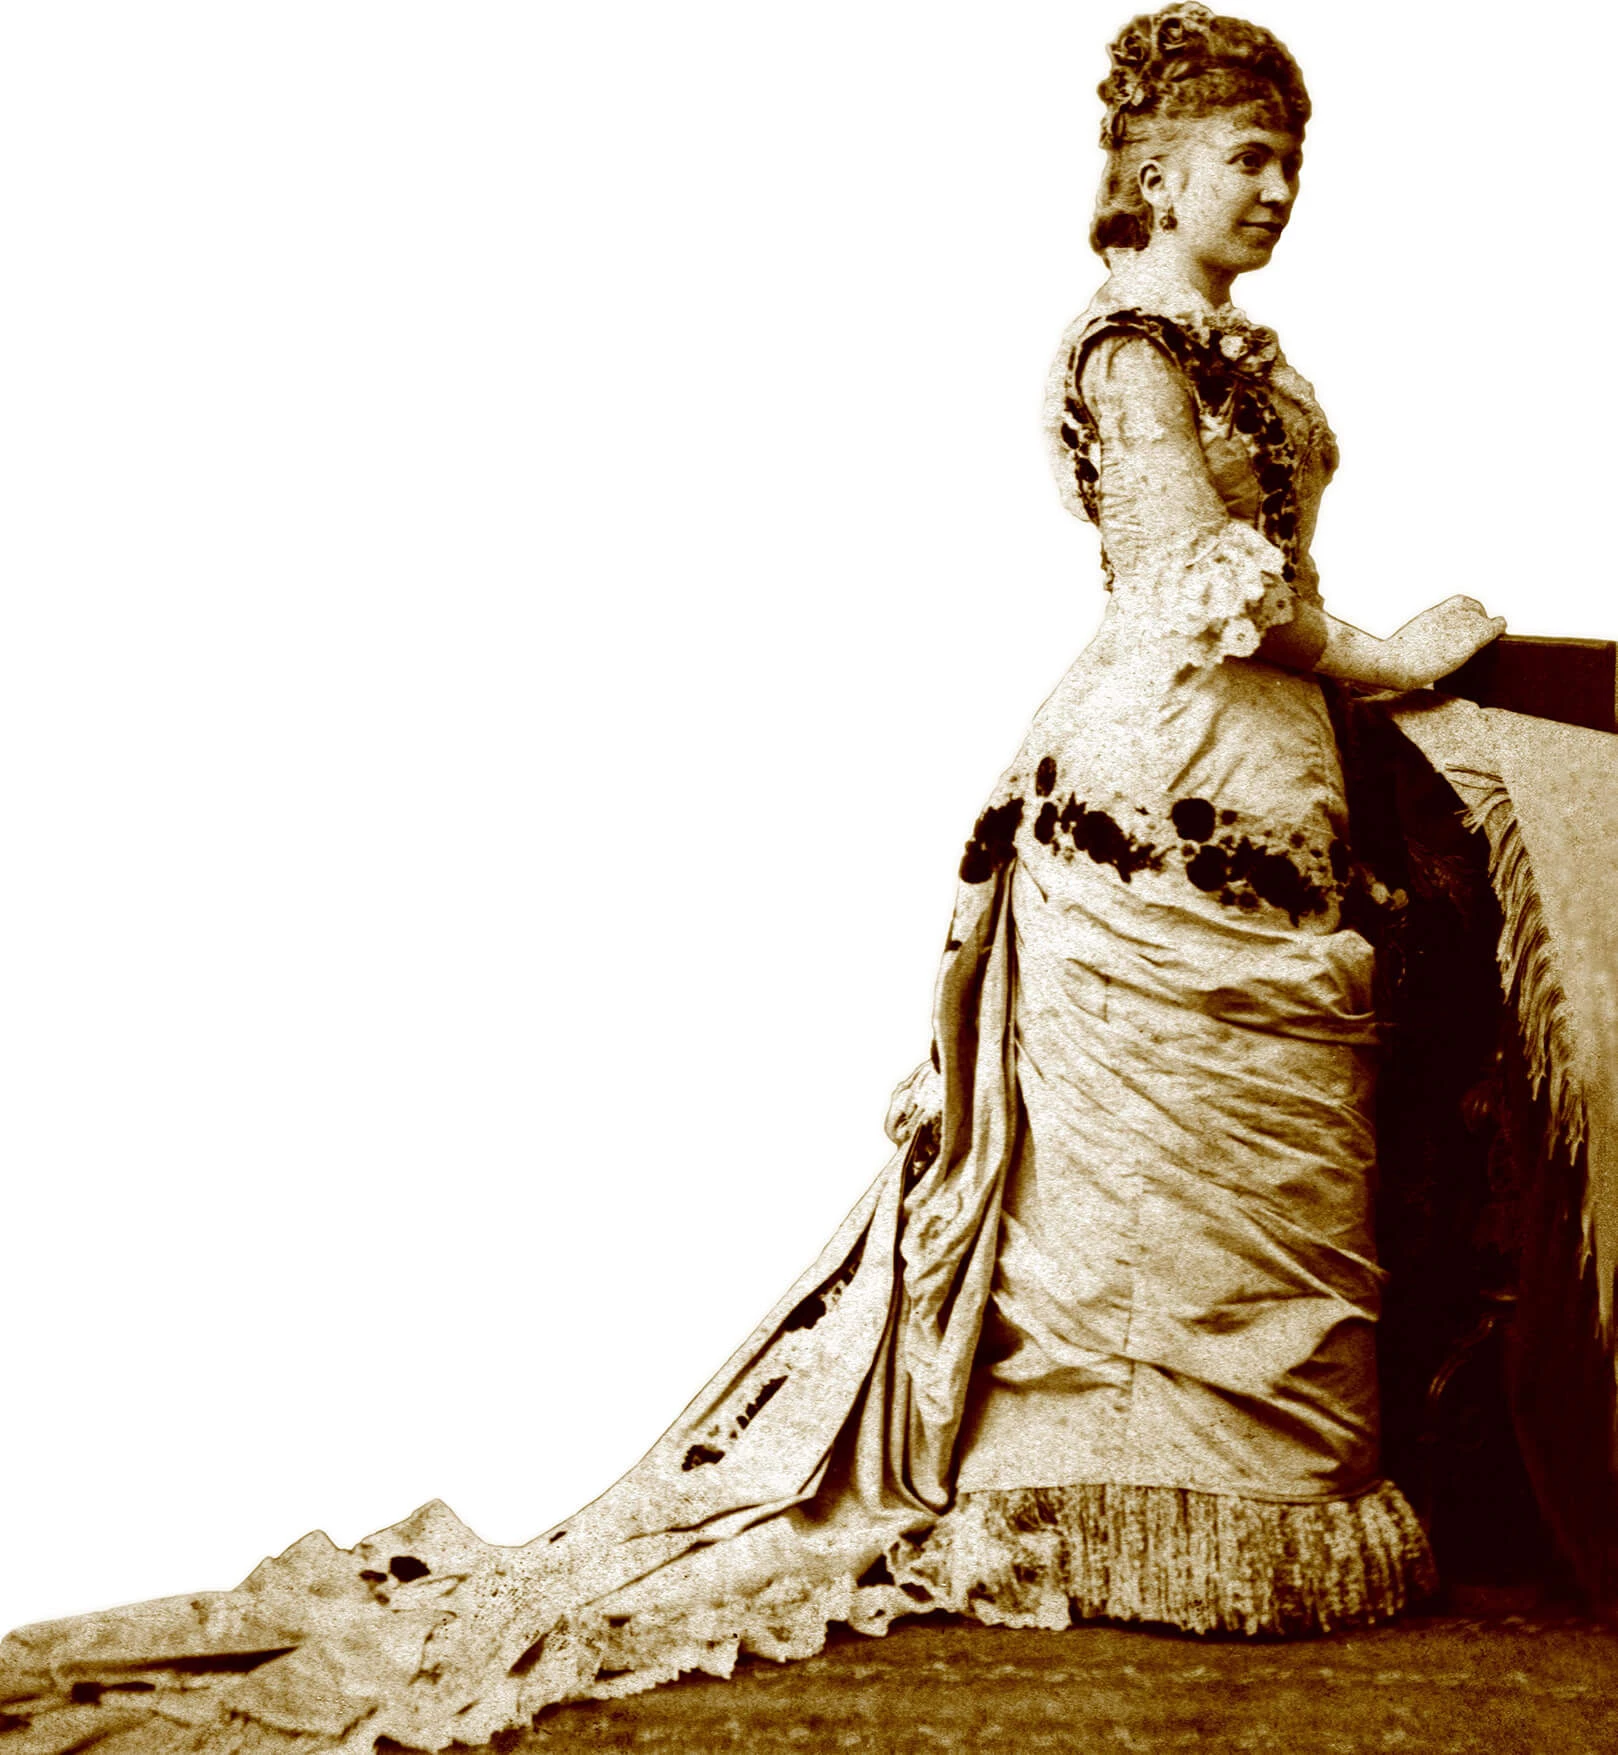 Full length portrait, showing her full gown and train. At the bottom of her skirt there are a few inches of fringe. The dress is light colored with darker floral details at the waist and shoulders. Sleeves go down to the elbow, where they end with two layers of lace flowing around the arm.